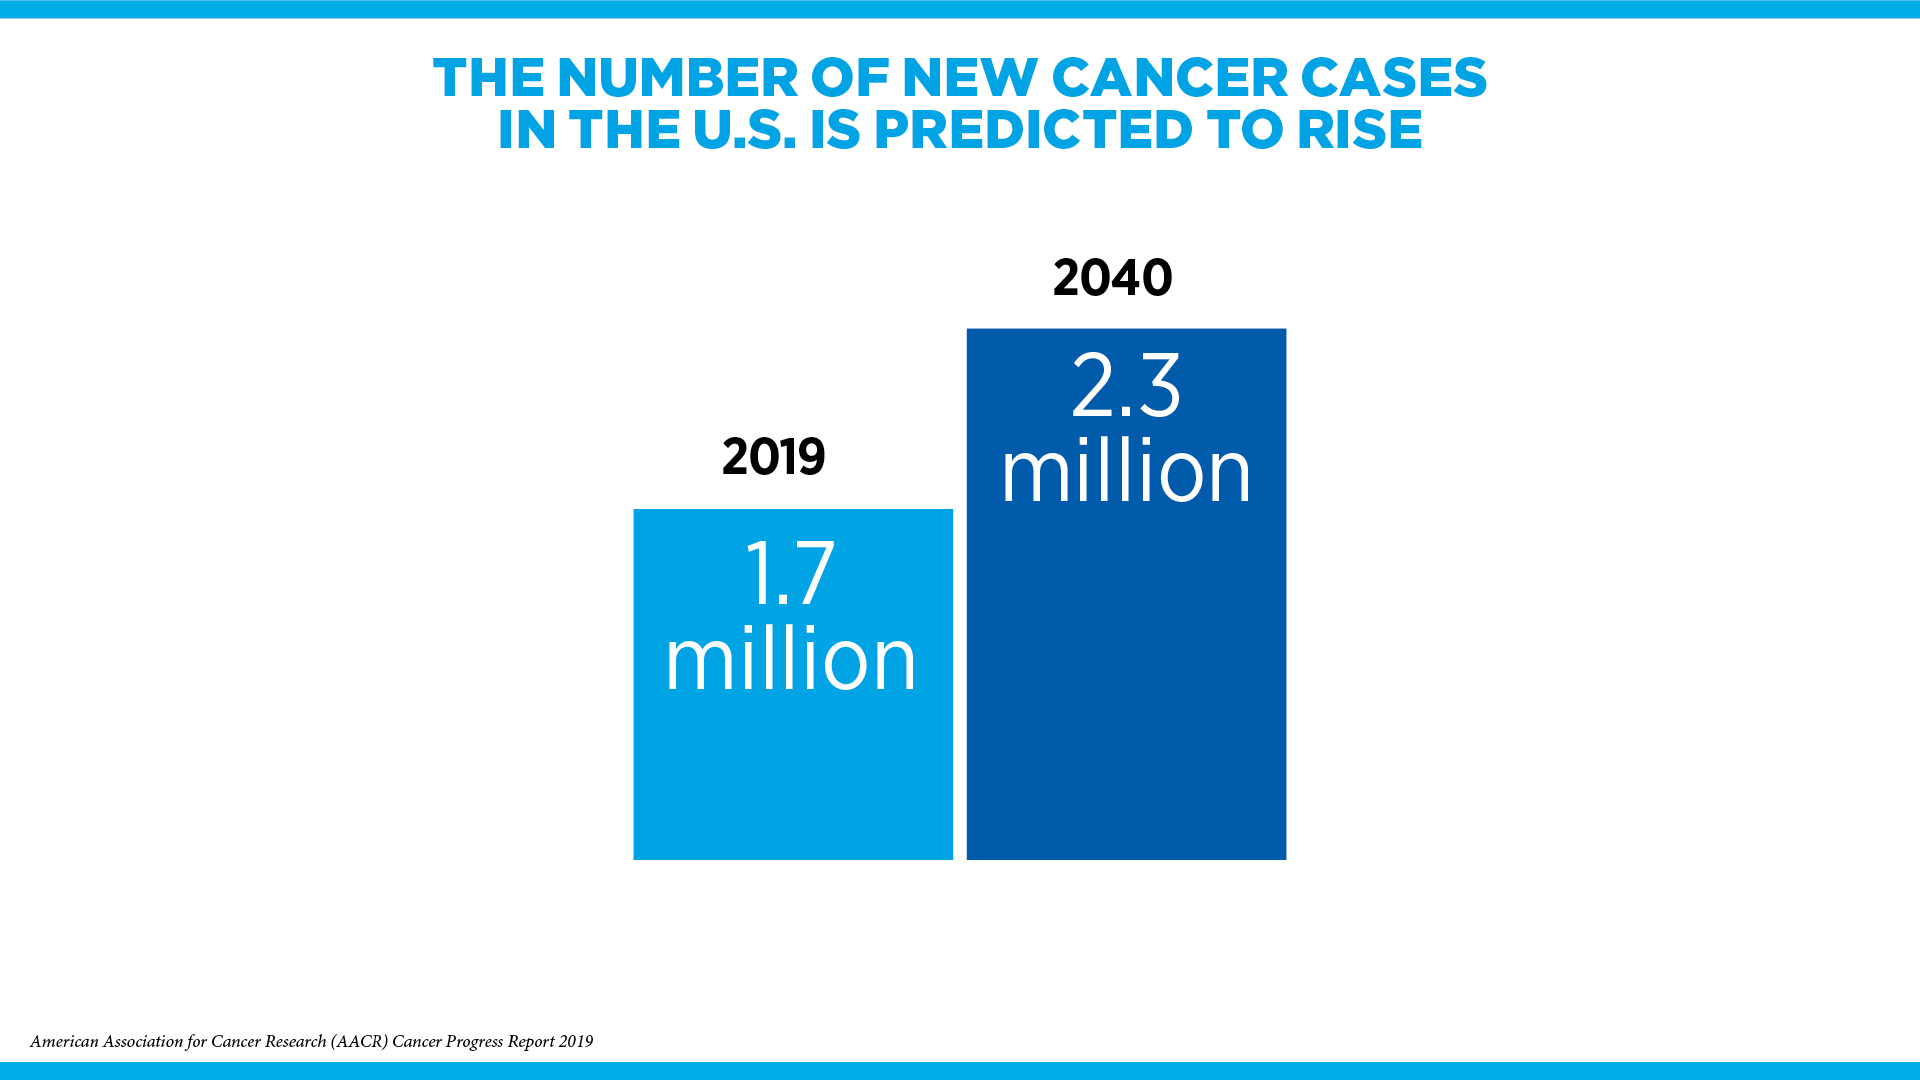 The AACR Cancer Progress Report 2019 states that despite progress, the number of cancer cases is increasing